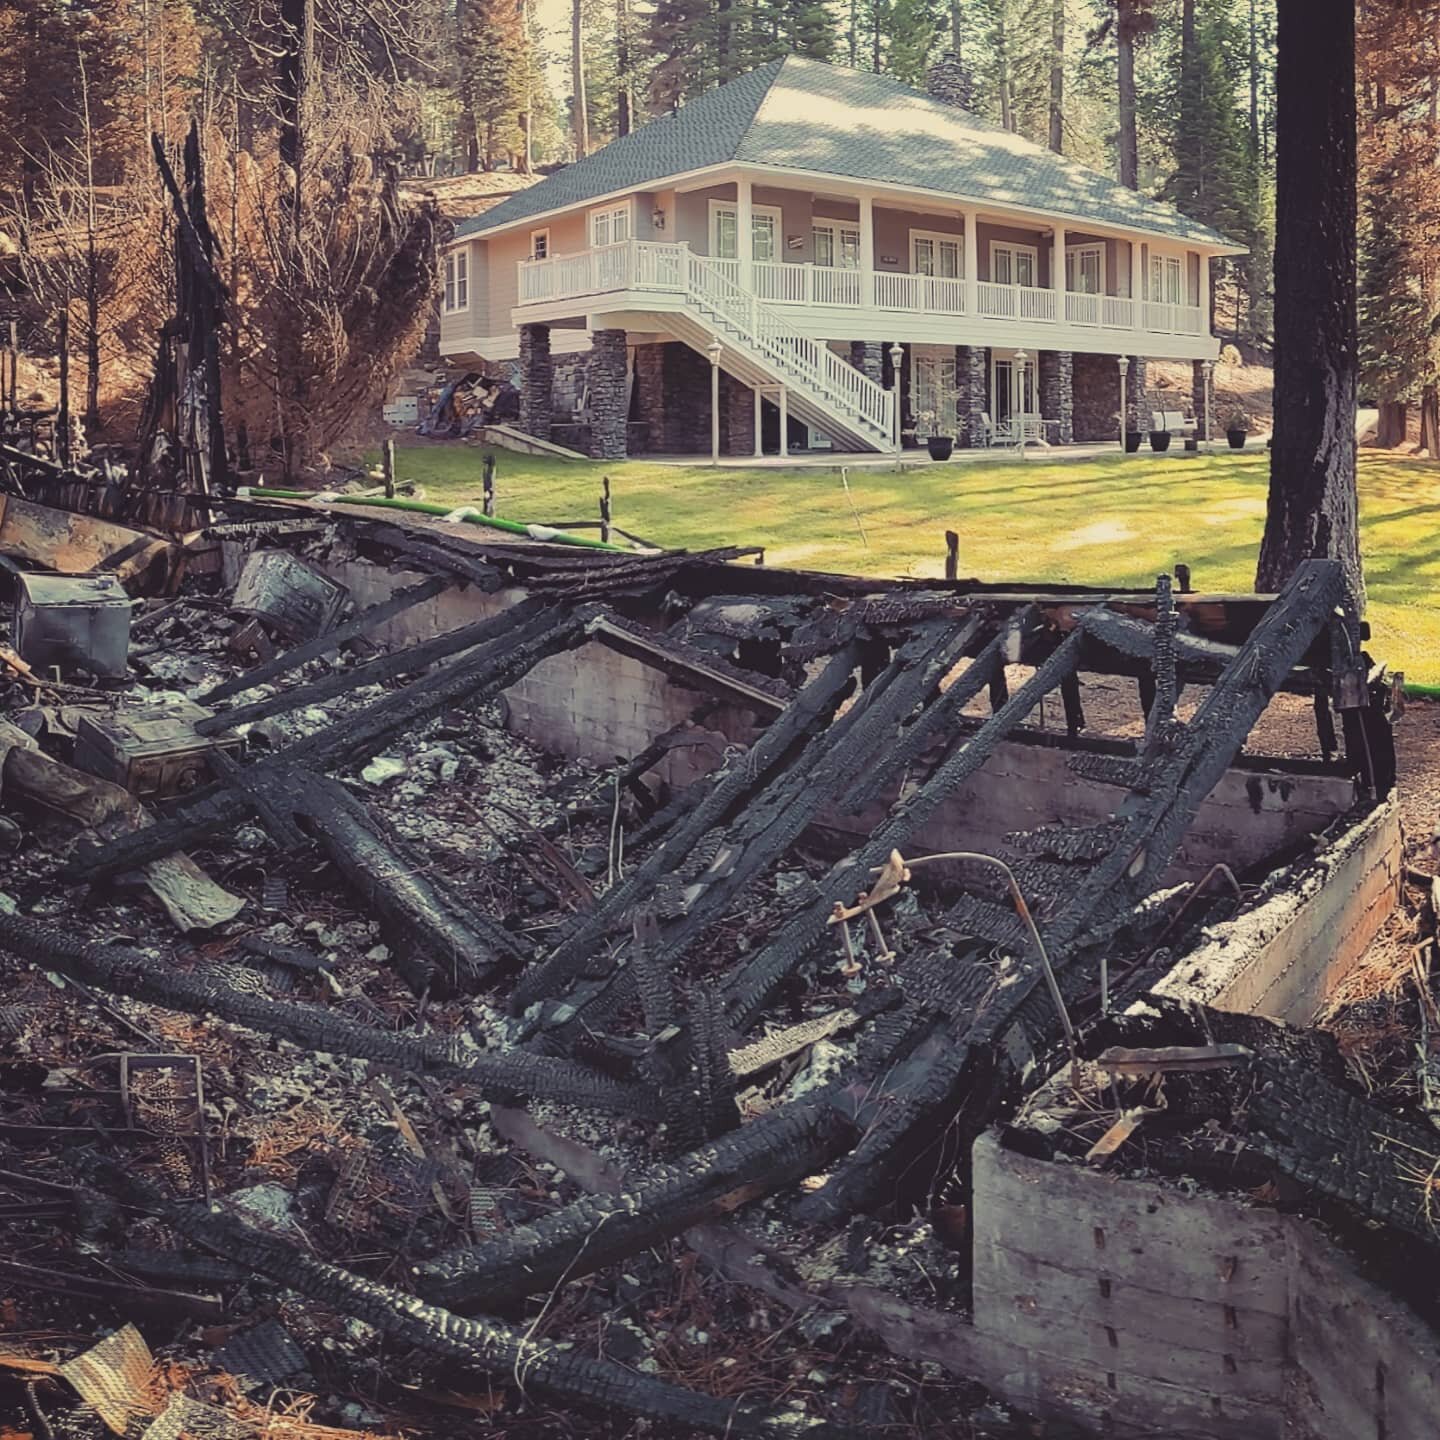 The house directly next door to my parent's house burned to the ground in the #dixiefire . It's a terrible reminder of the fragility of human creation and power of nature. #getfireinsurance